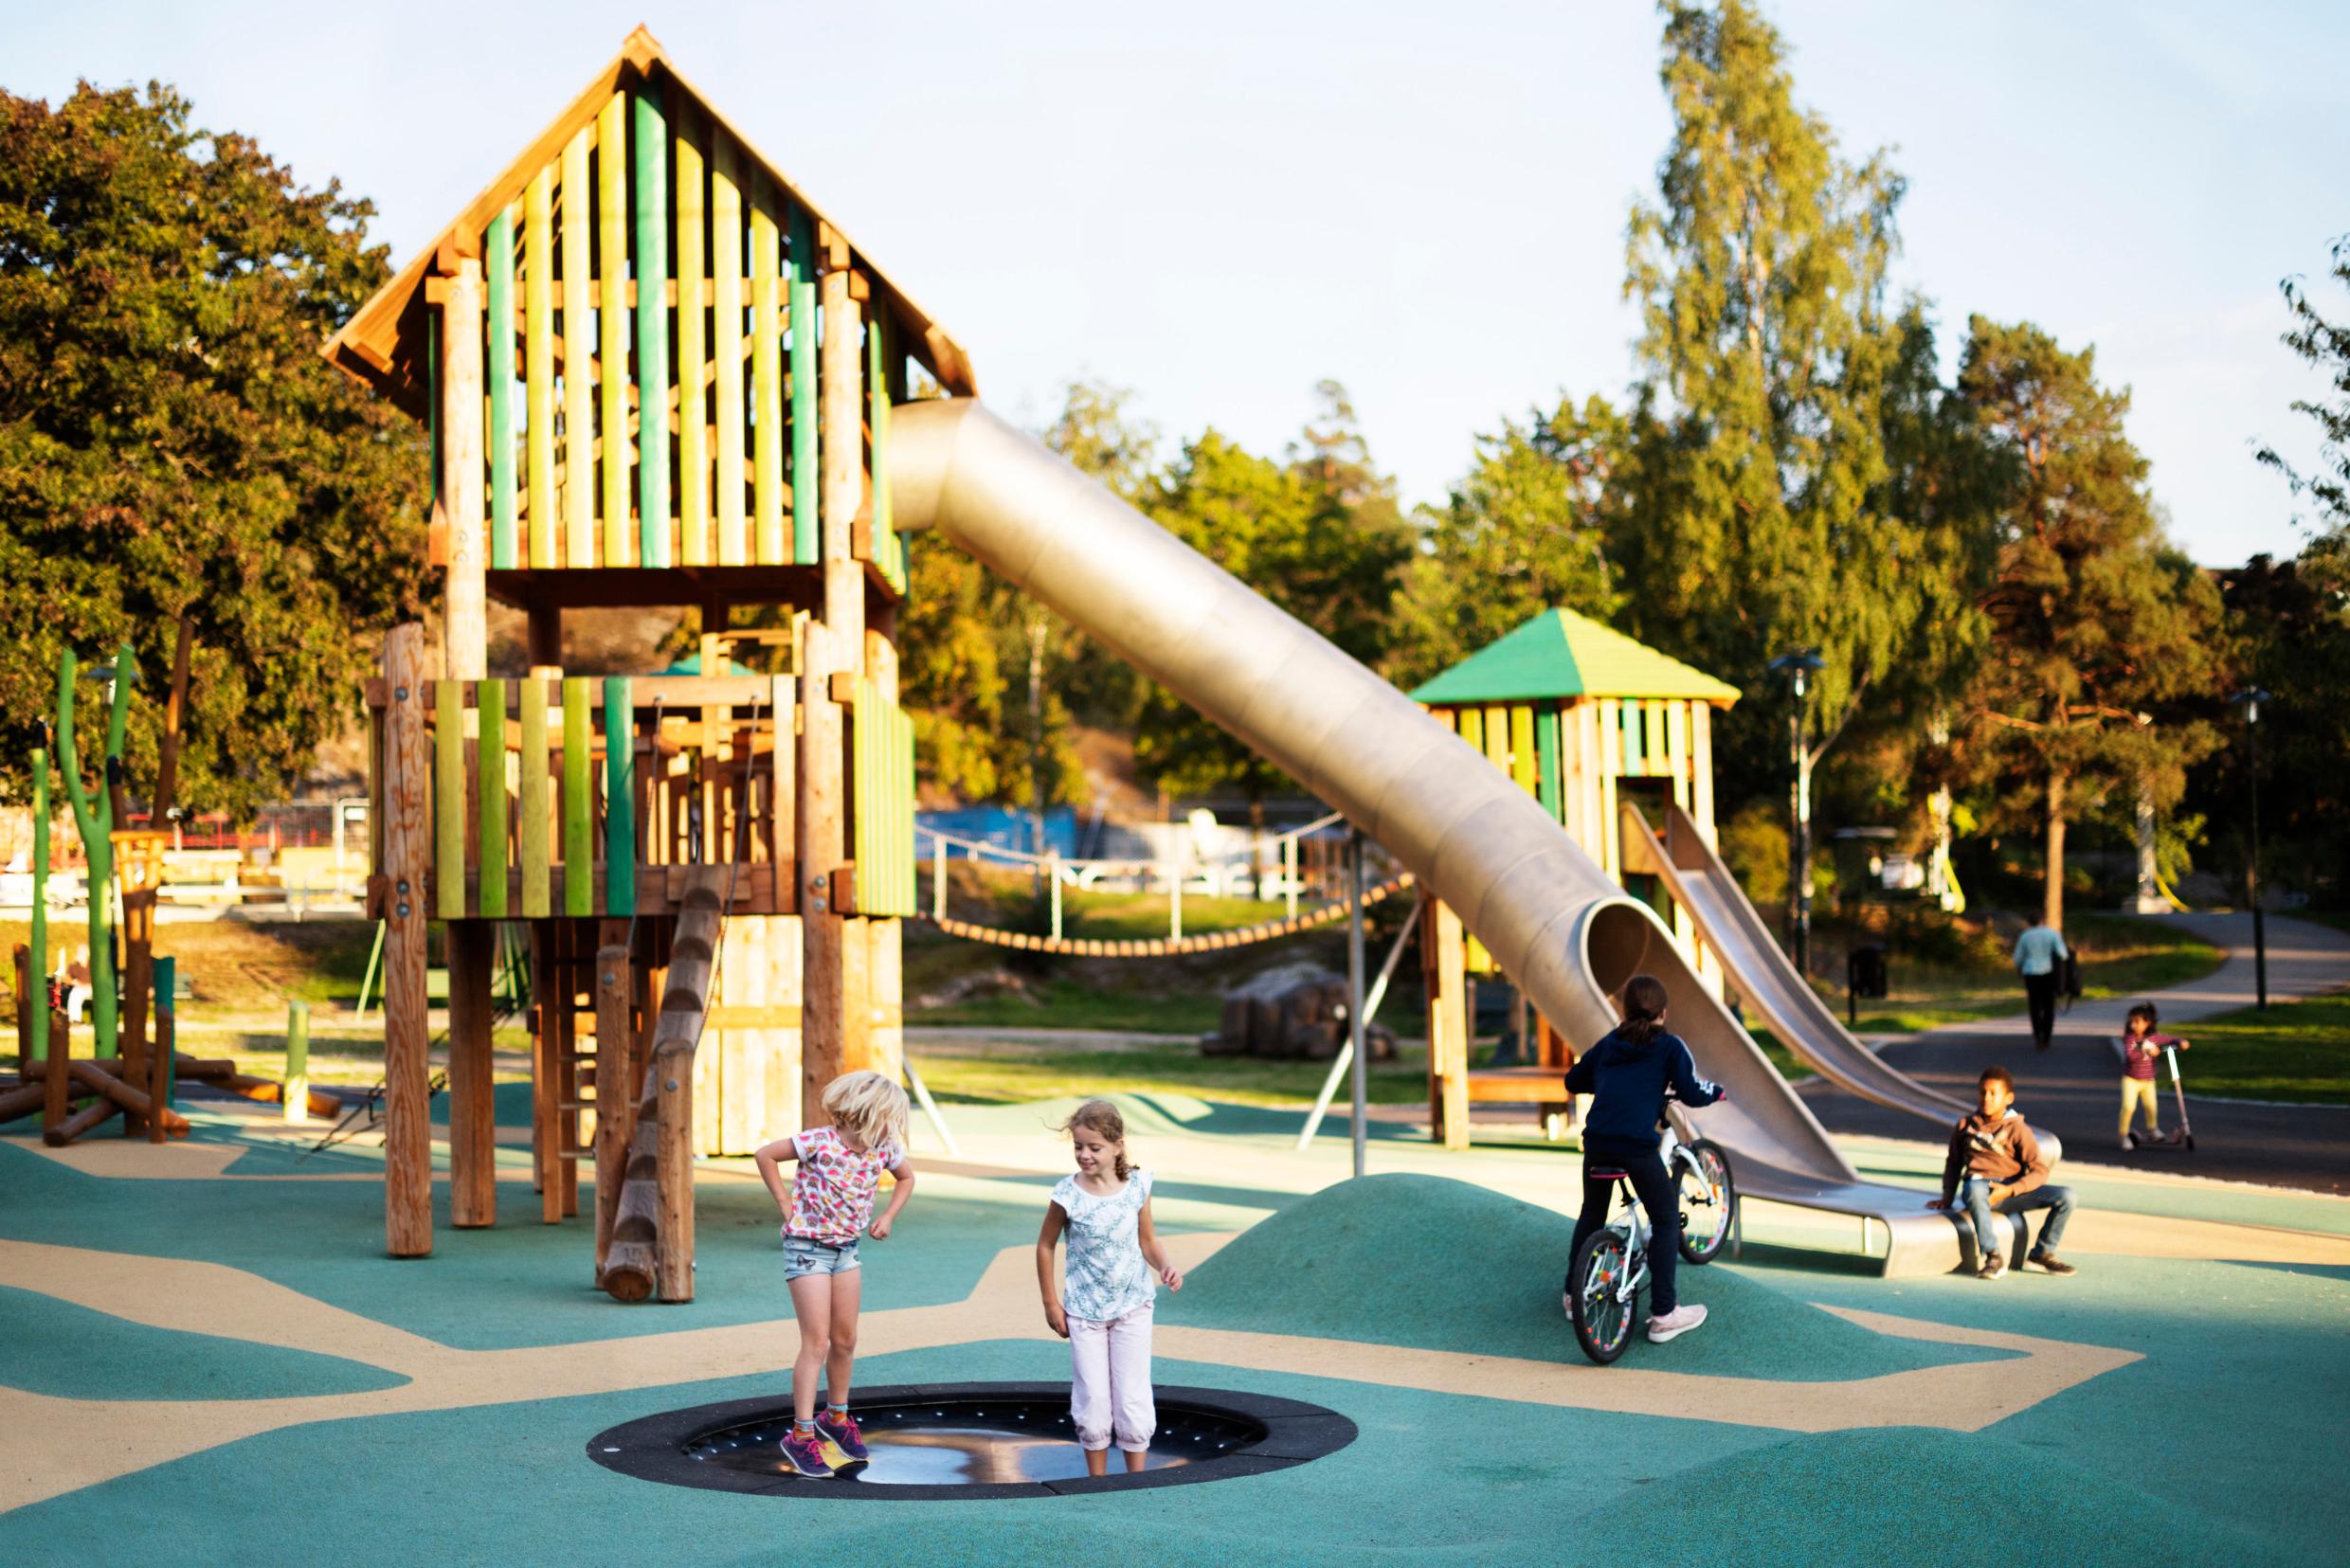 Children playing at a playground in a green area.